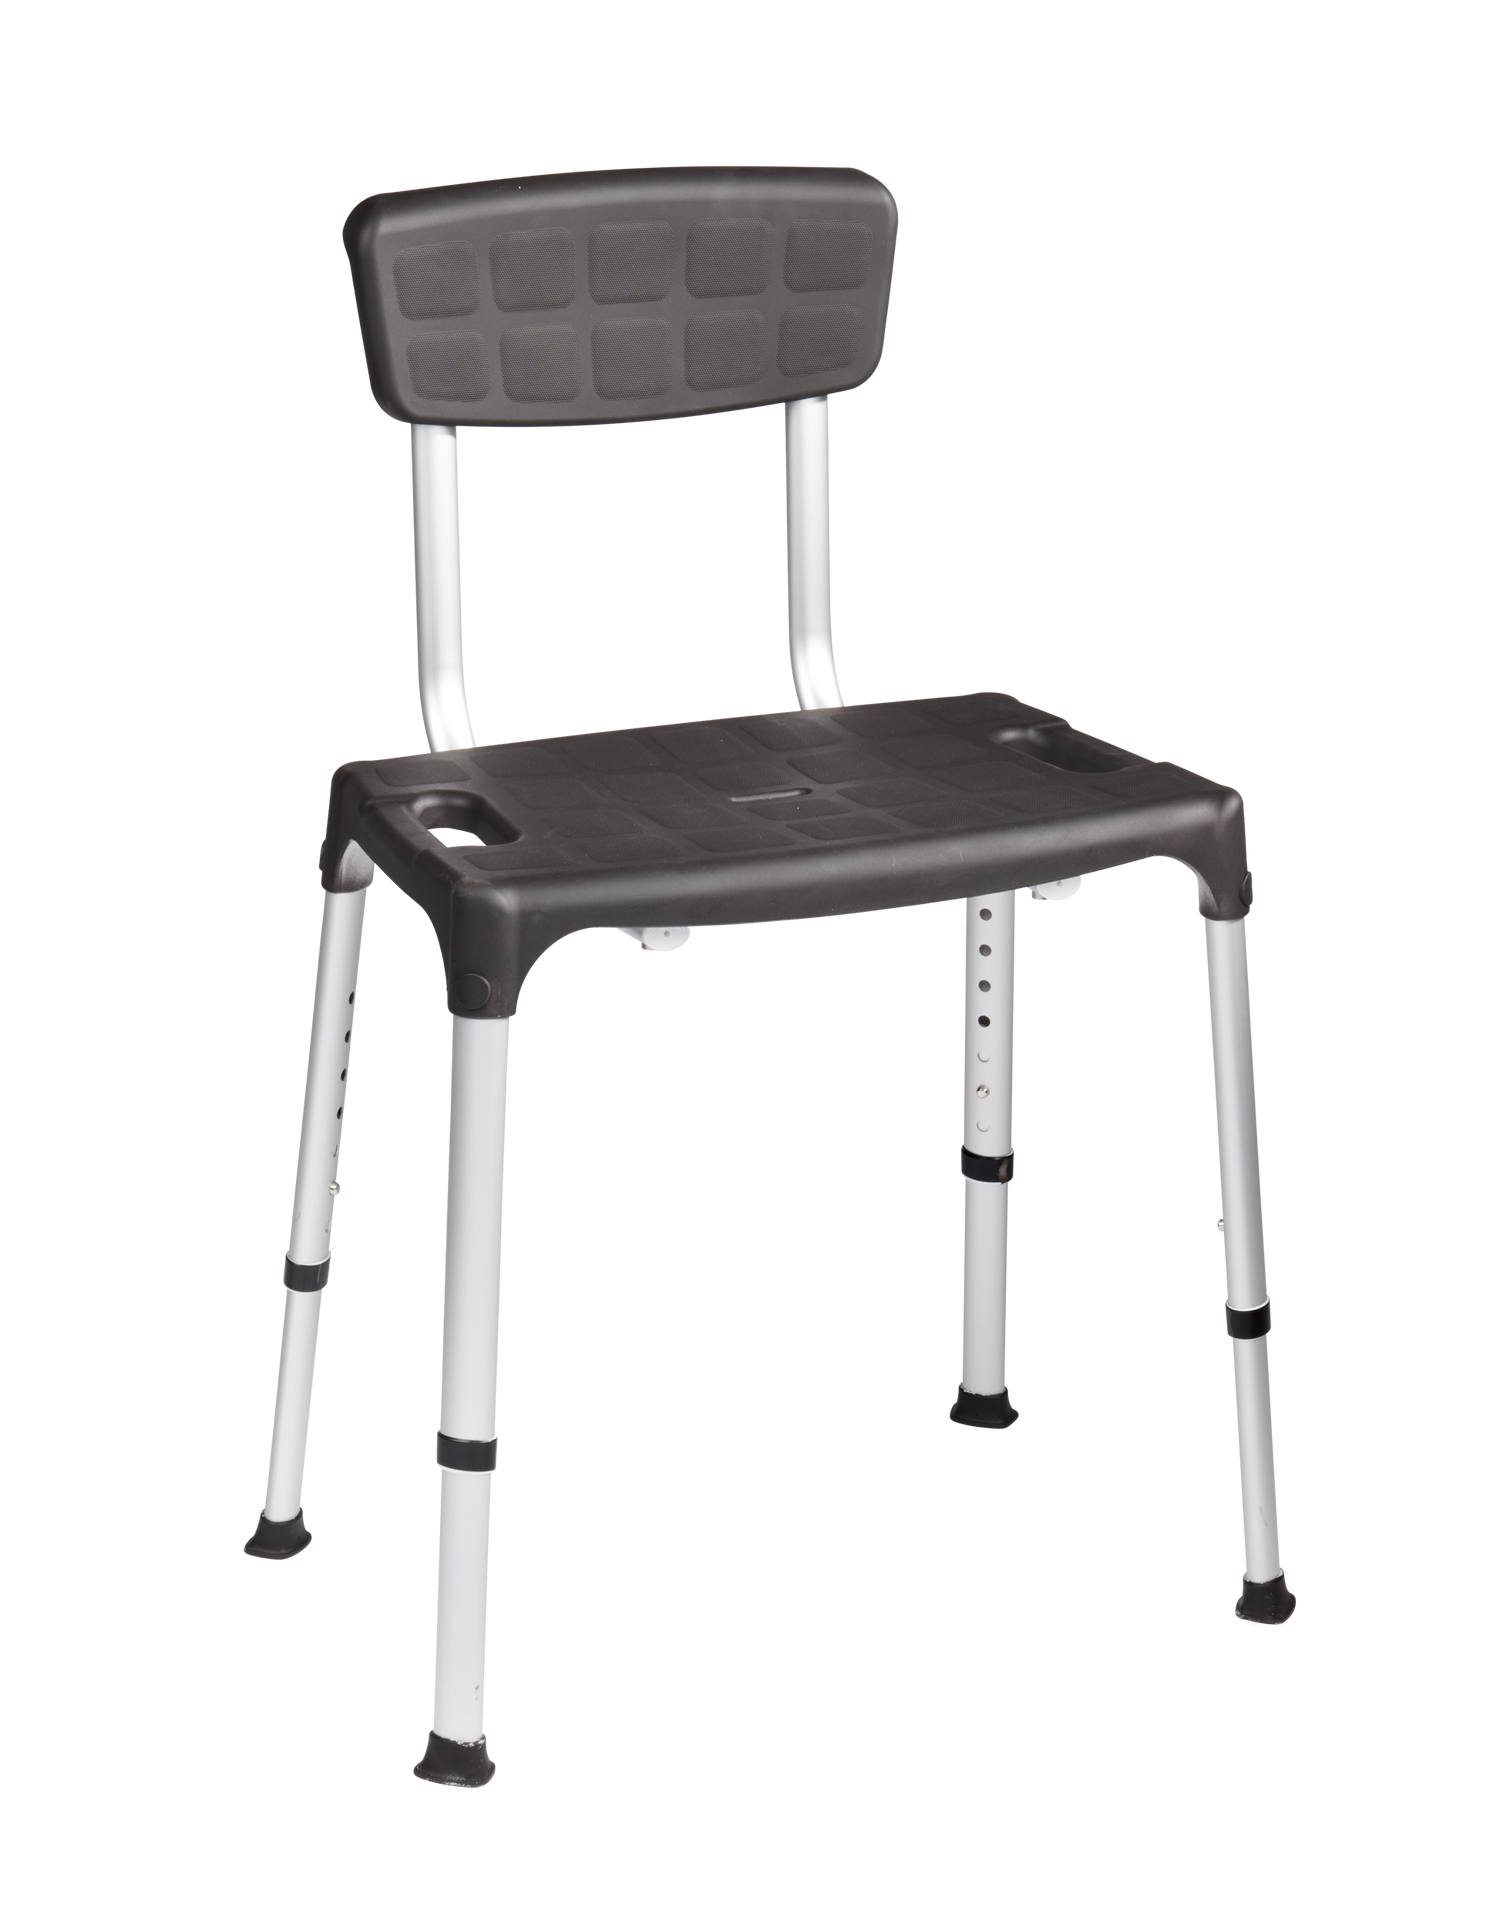 SecuCare Quattro Shower Chair with backrest, black, adjustable height 390-540 mm